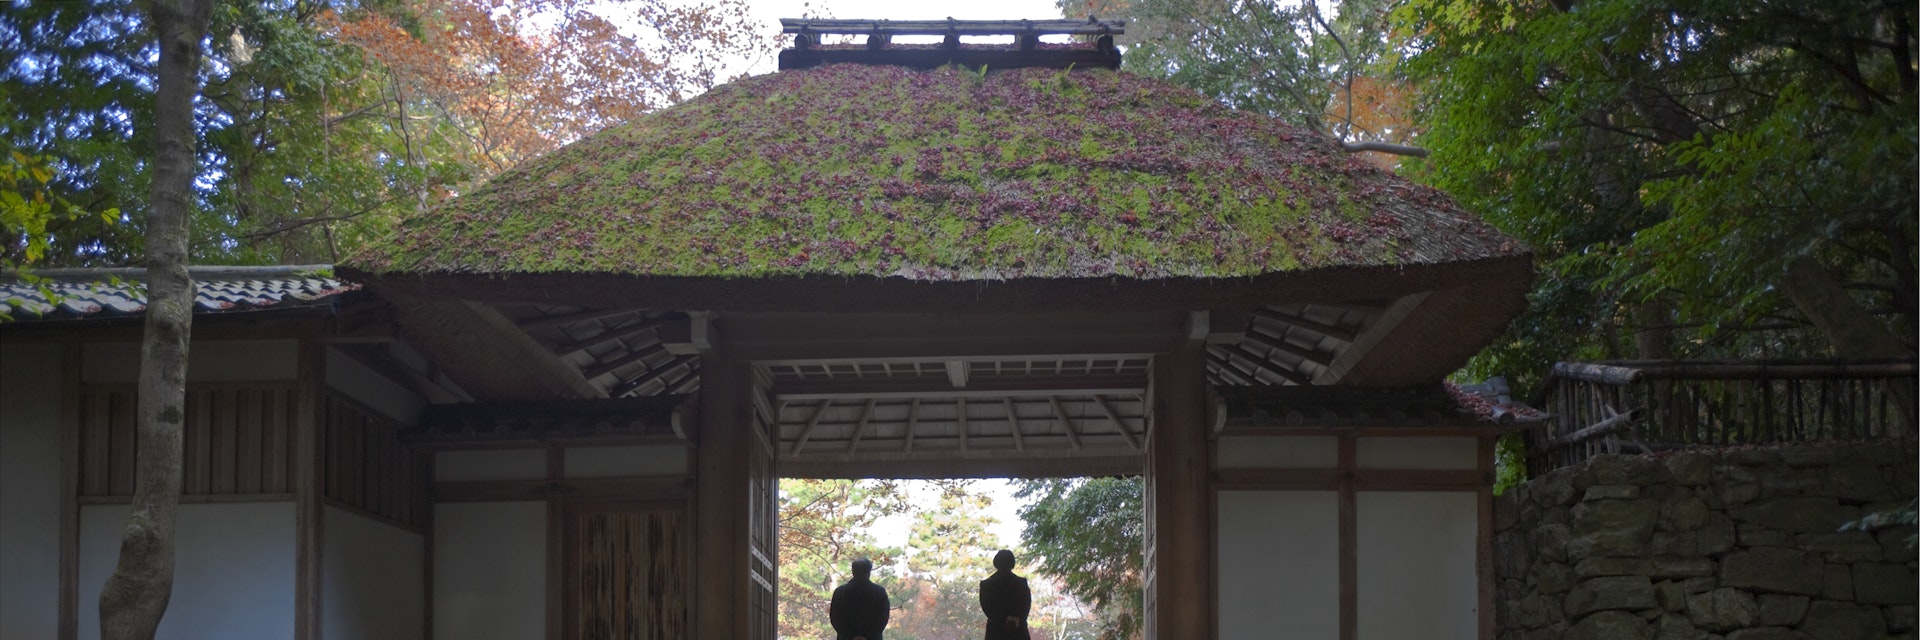 Thatched gate at Kyoto's Honen-in Temple